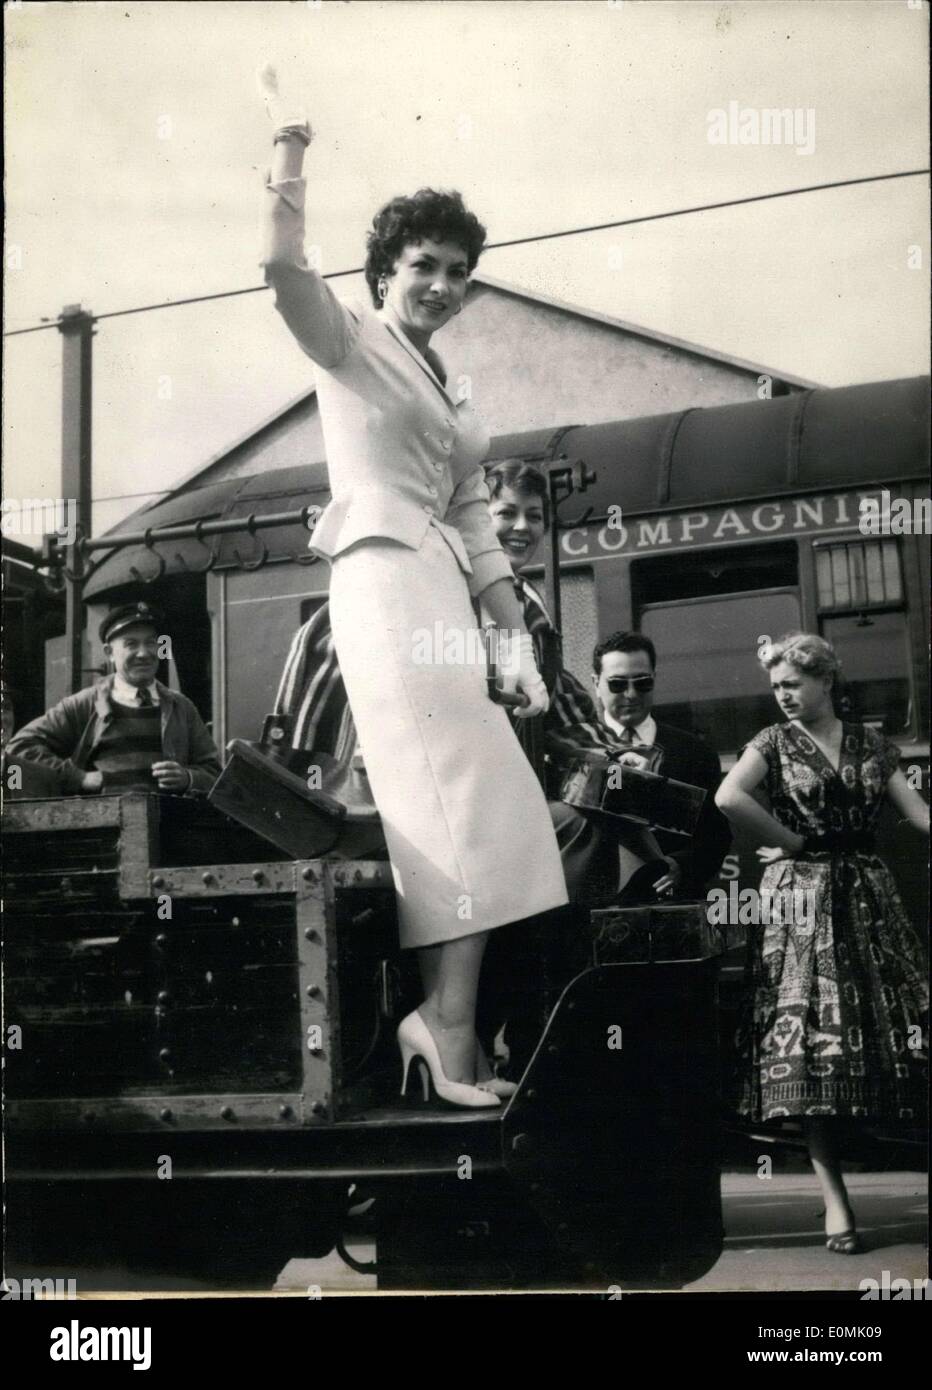 Jun. 30, 1955 - The beautiful Italian star, Gina Lollobrigida, arrived this morning at the Lyon Train Station. She will be shooting her next film in France with Anne Vernon. Here she is on top of a wagon at the station waving to admirers with Anne Vernon behind her. Stock Photo